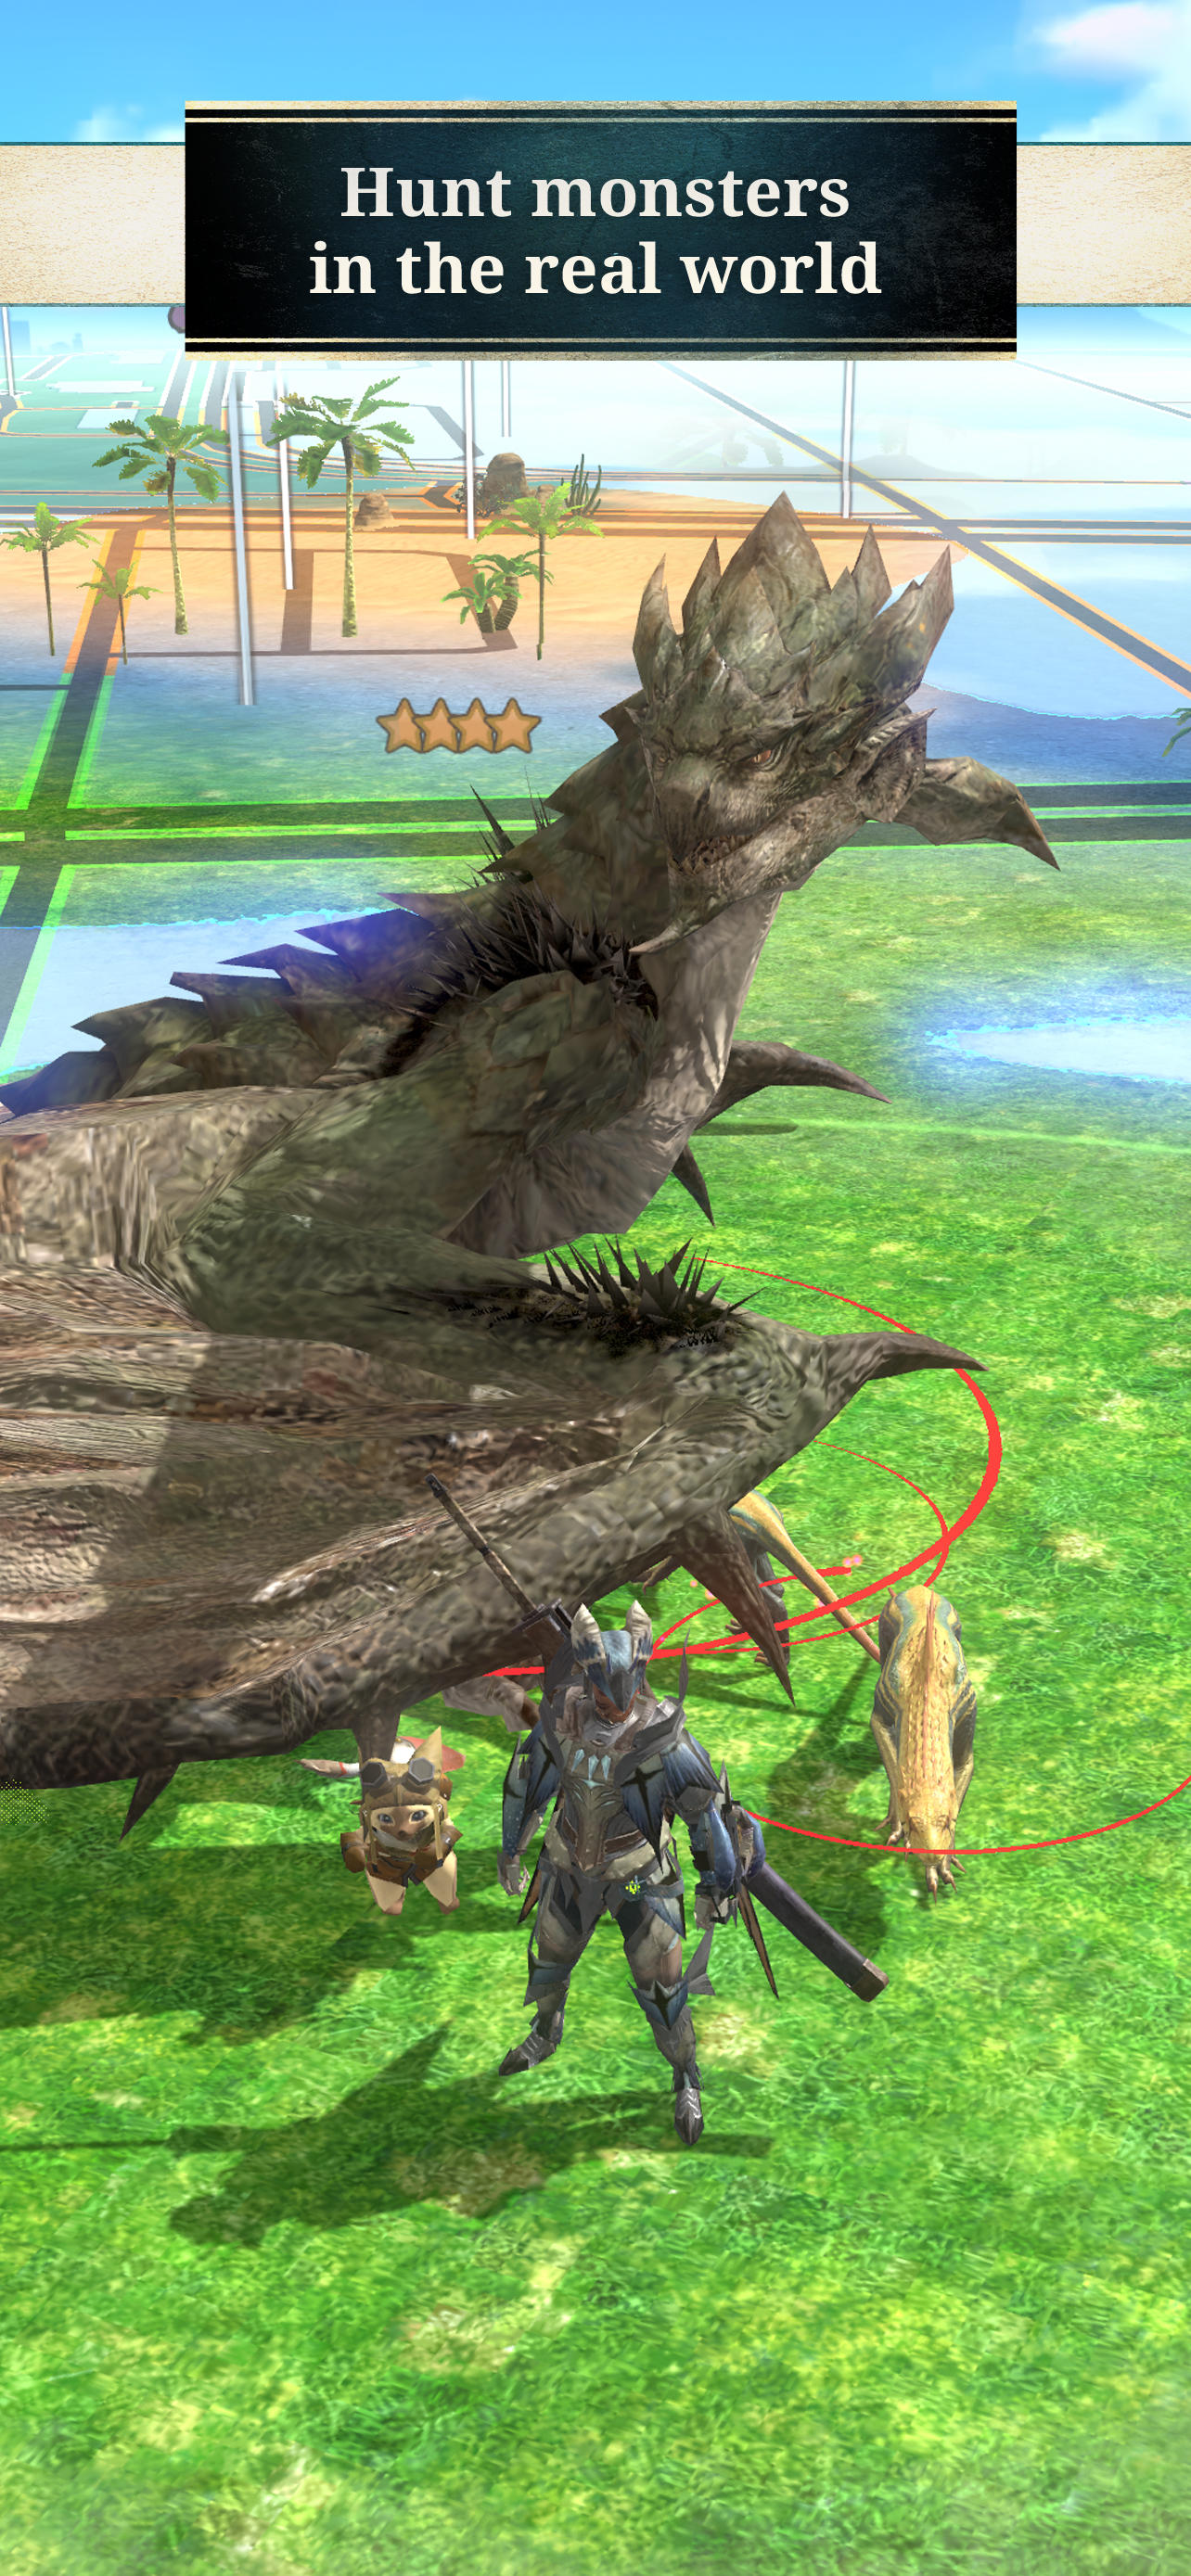 Monster Hunter Now -  - Android & iOS MODs, Mobile Games &  Apps